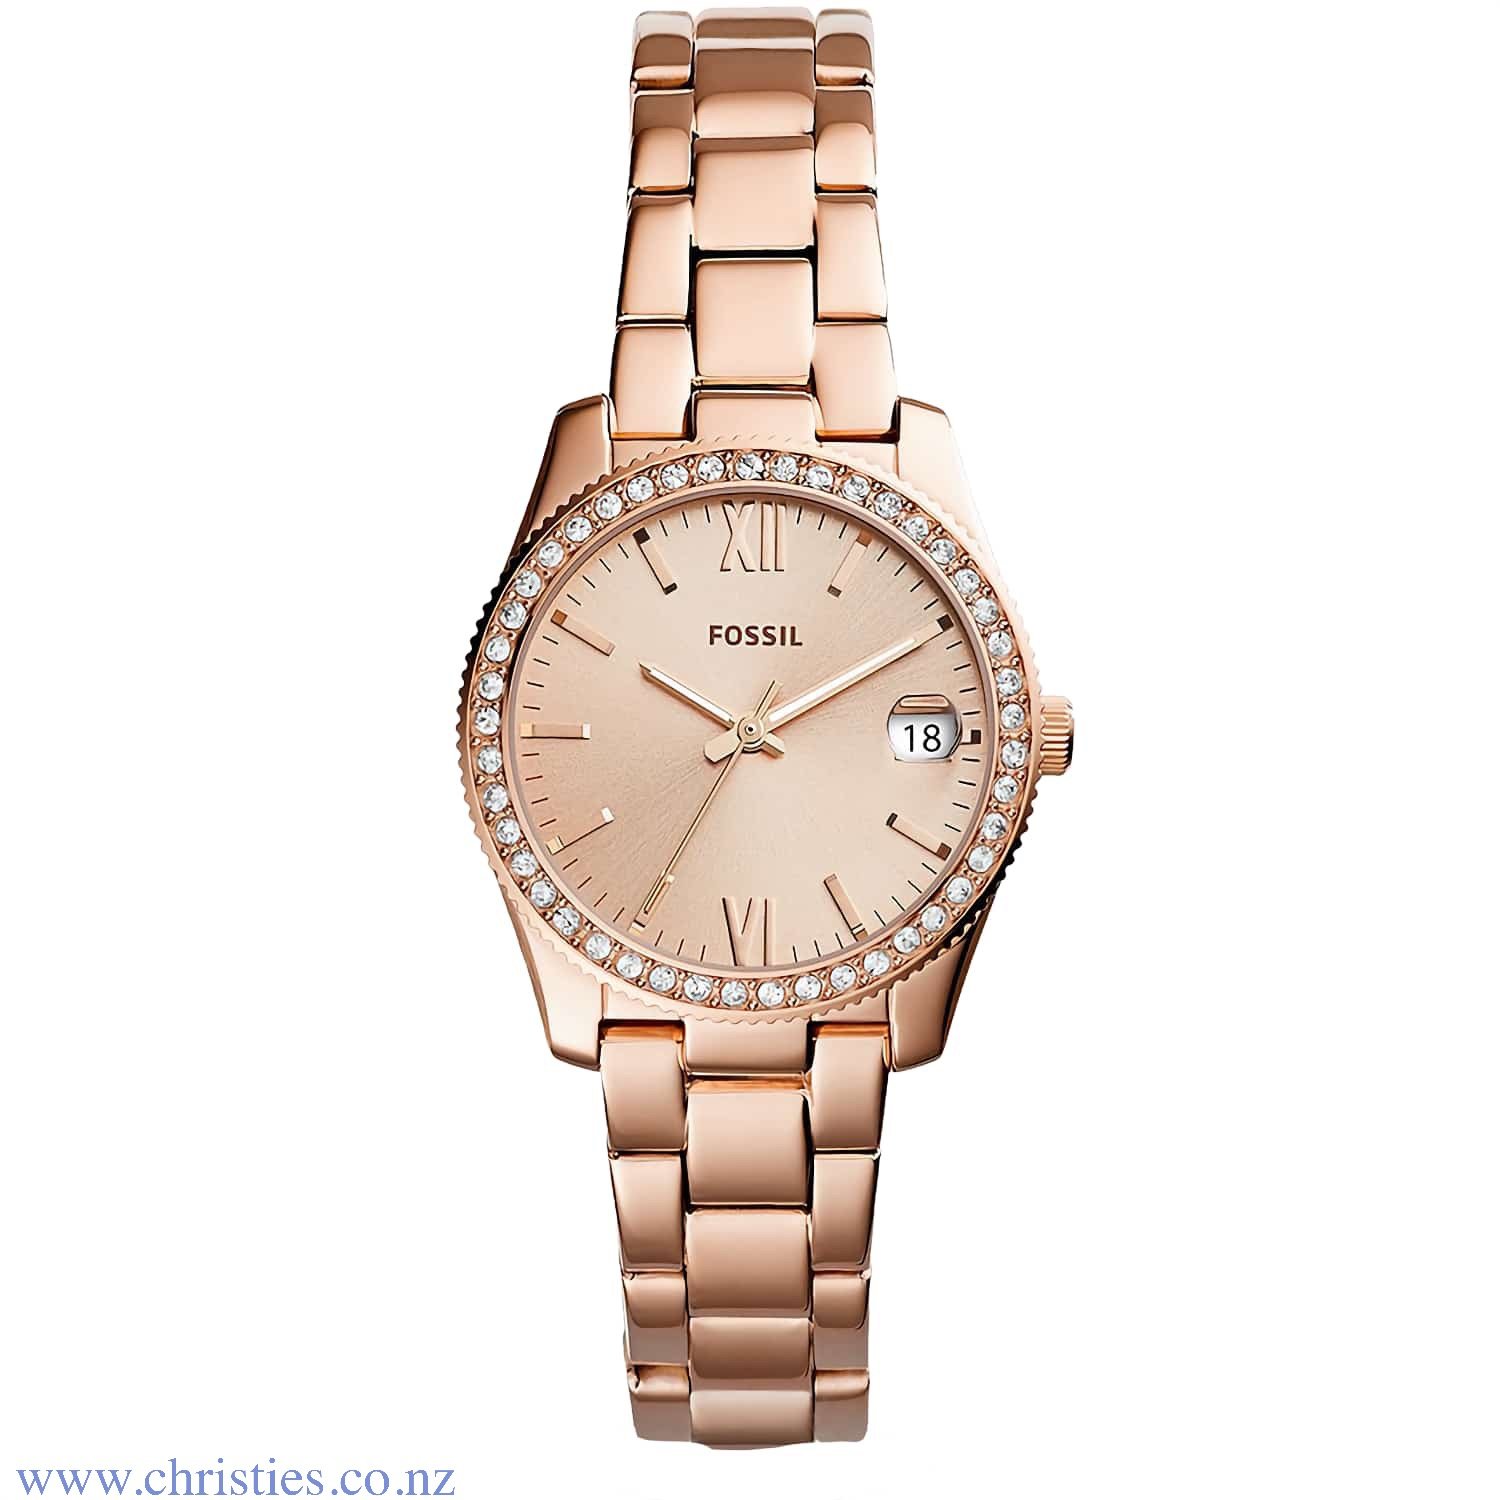 ES4318 Fossil Scarlette Mini Rose Gold Tone Watch. ES4318 Fossil Scarlette Mini Rose Gold Tone Watch with 50 Metre Water Resist Rating Afterpay - Split your purchase into 4 instalments - Pay for your purchase over 4 instalments, due every two weeks. You’l